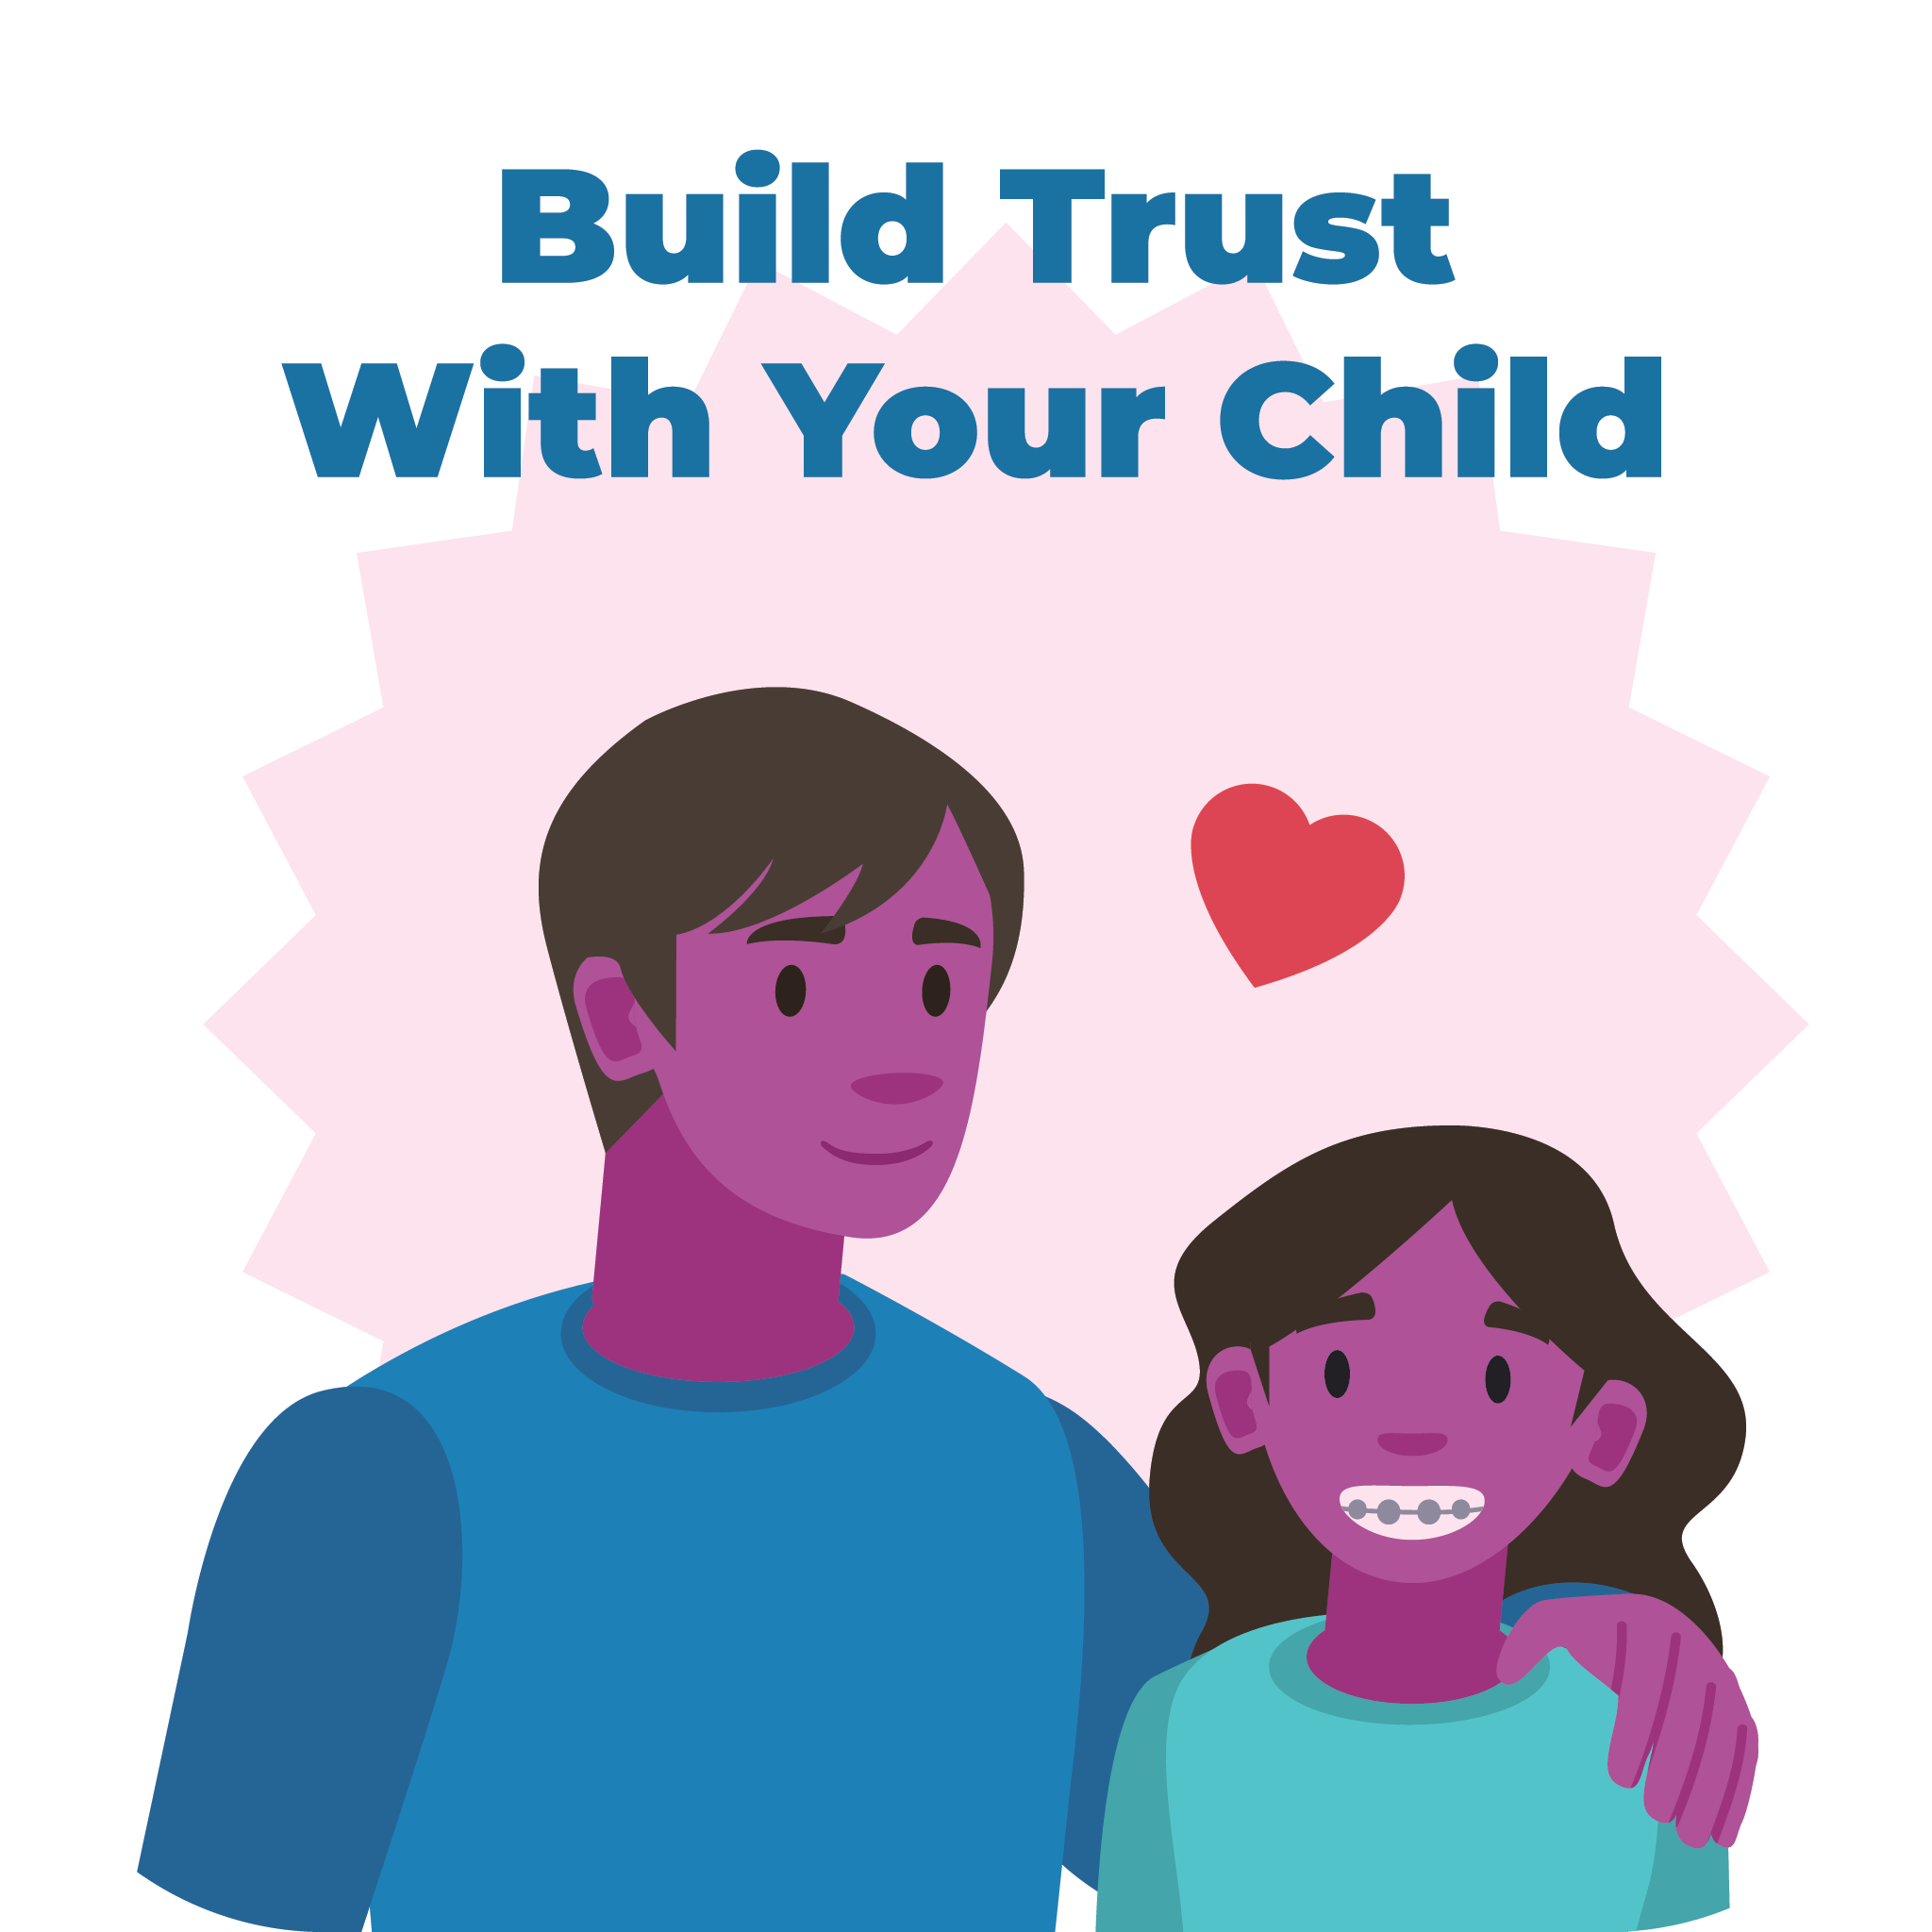 Build trust with your child.